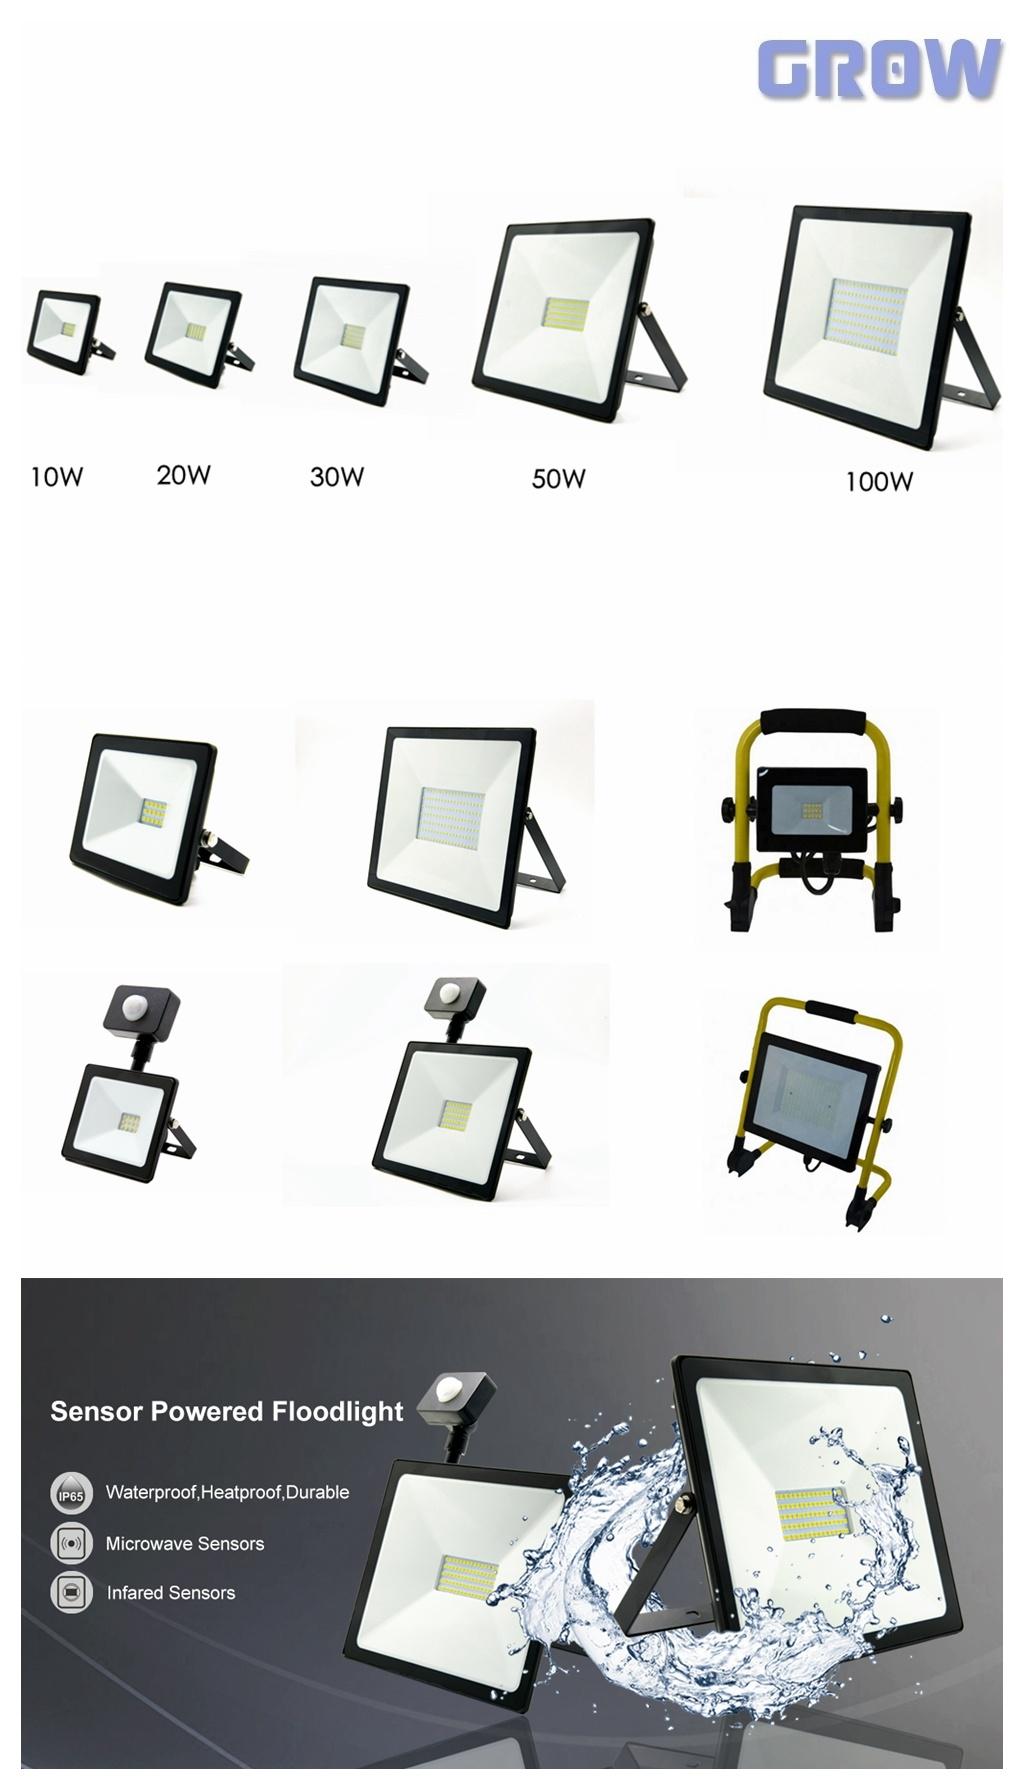 Distributor of LED Floodlight for Outdoor Industrial Garden Lighting with 5years Warranty for Wide Flood Light